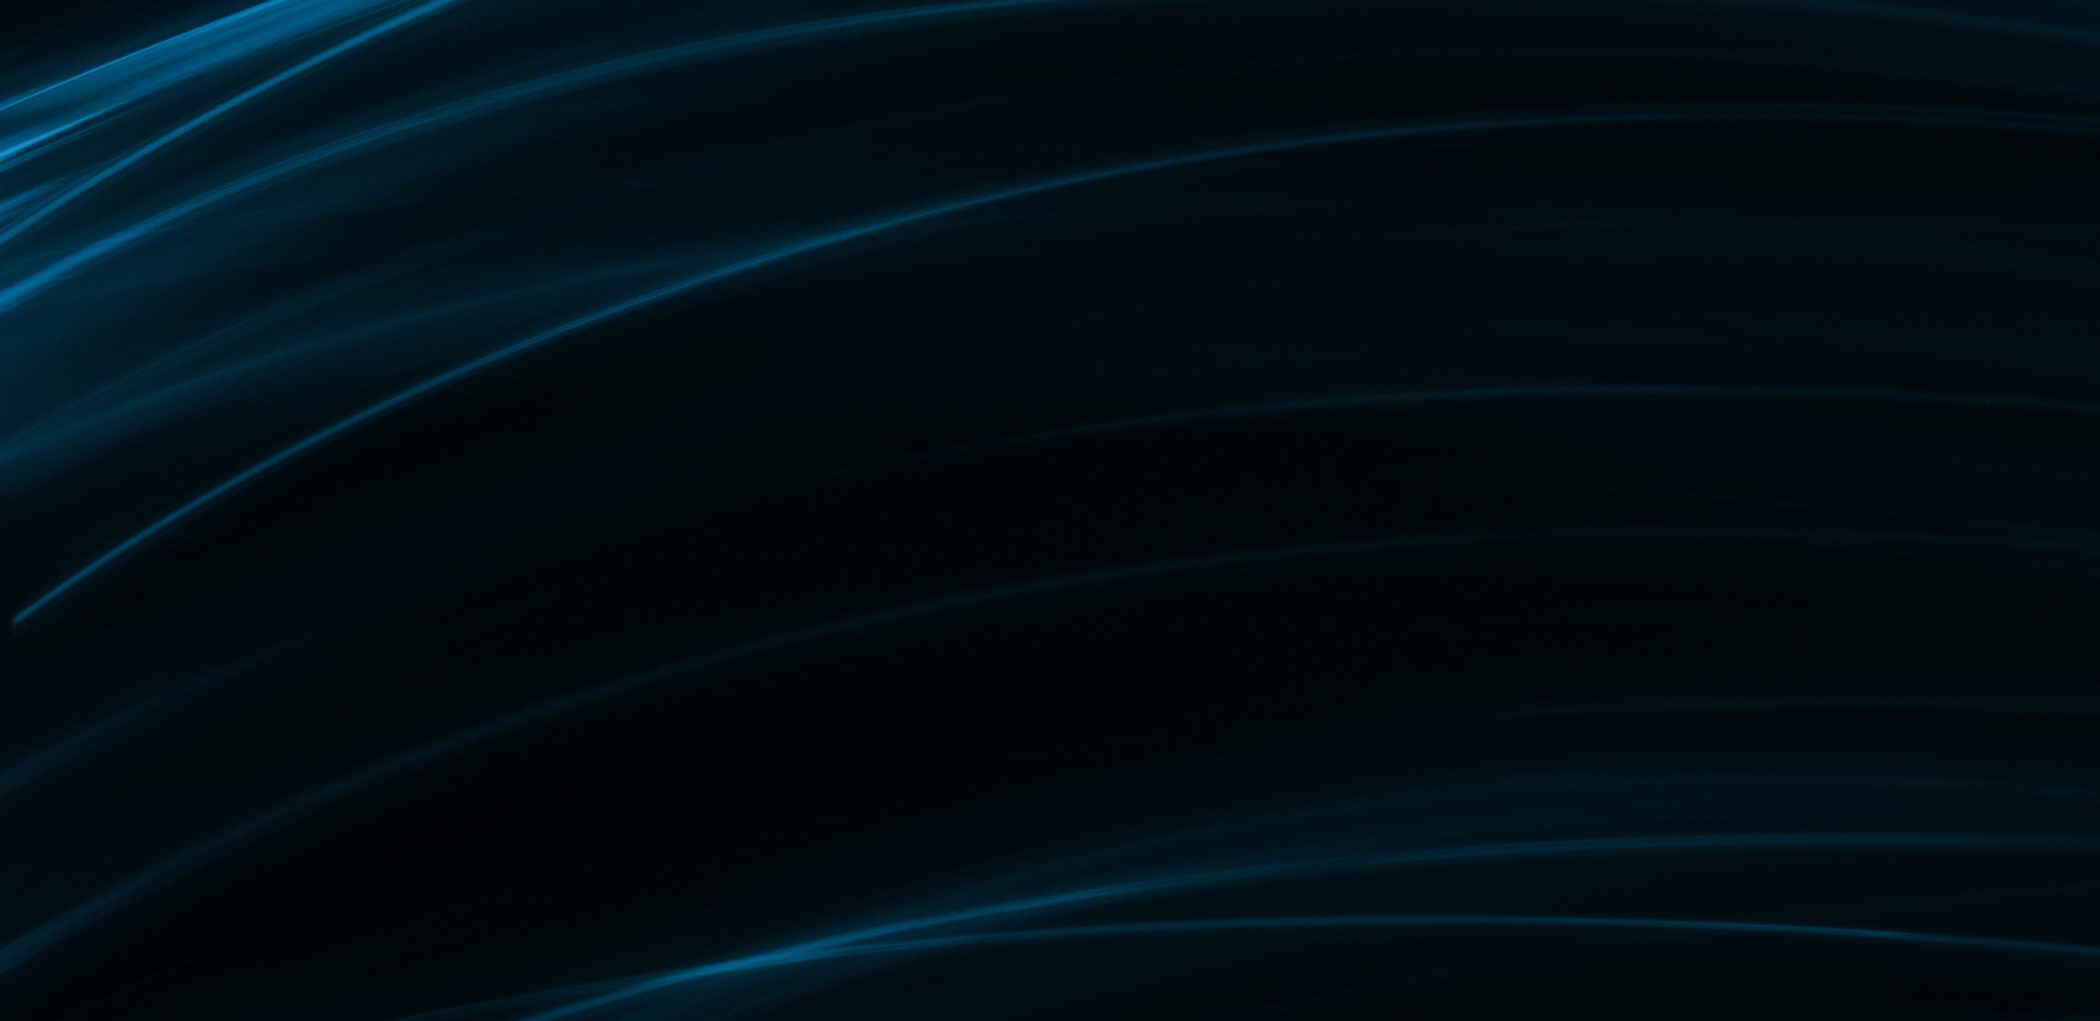 Background image of circular lines